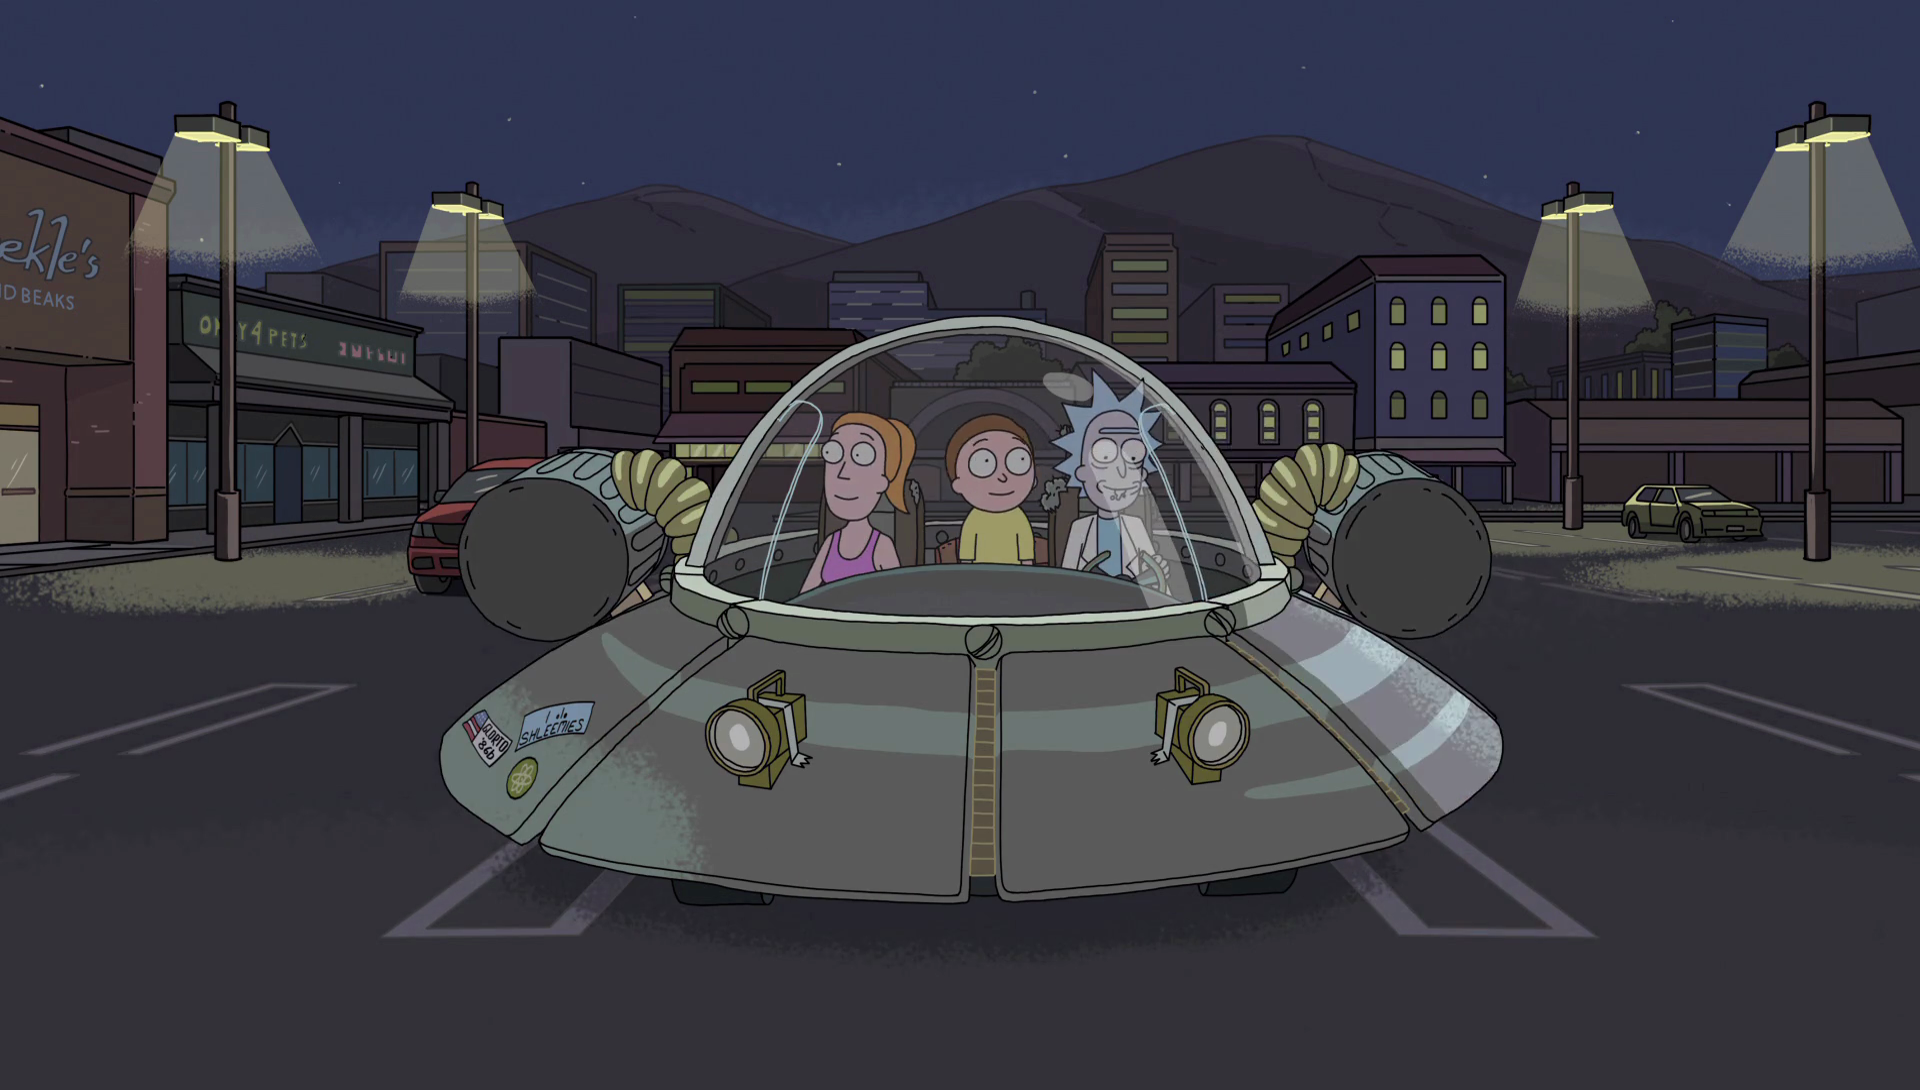 Image S2e6 summer morty rick in ship.png Rick and Morty Wiki